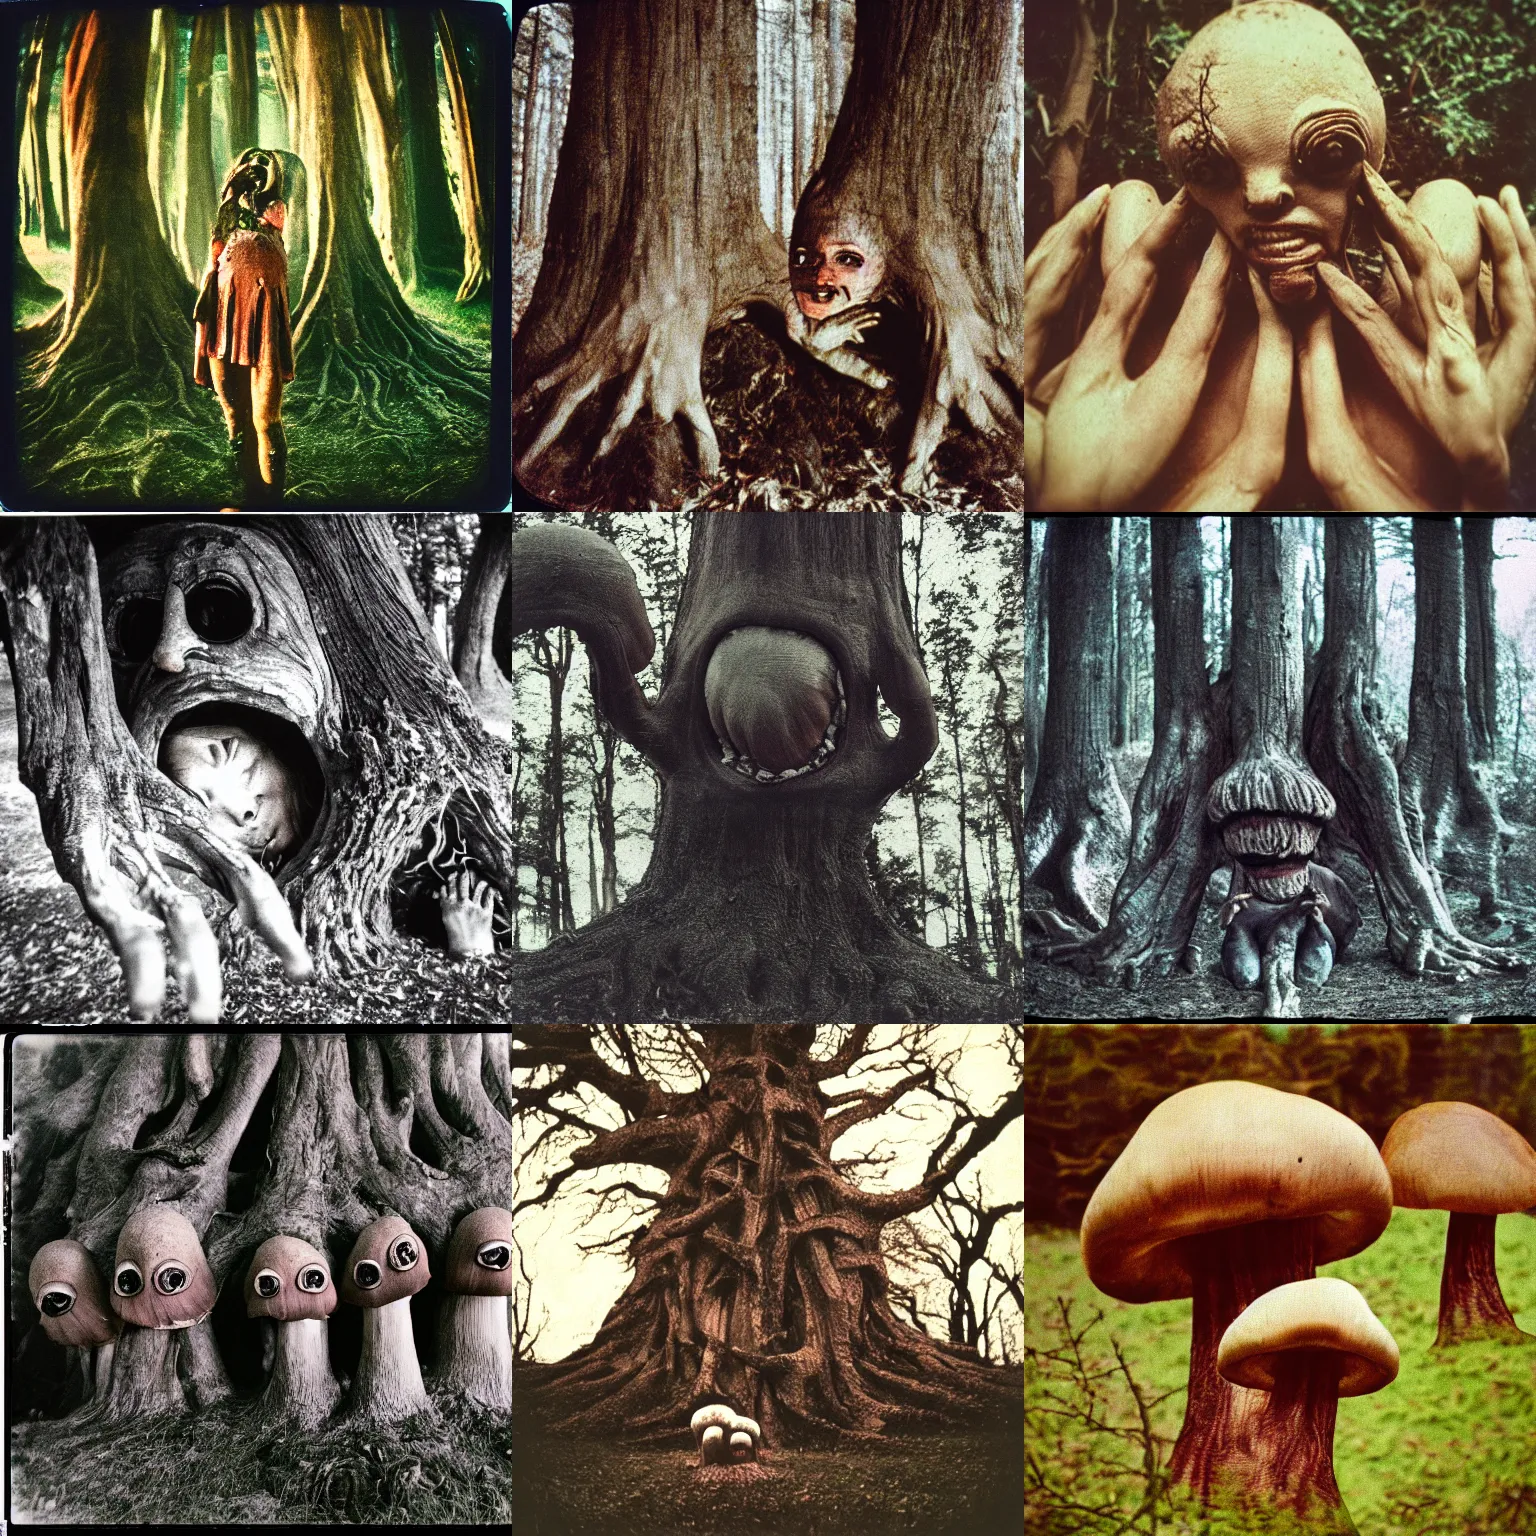 Prompt: swallowing mushrooms, critical moment, terrifying tree monster with distorted faces made of bark, lovecratftian horror, pans labyrinth, shot on expired instamatic film